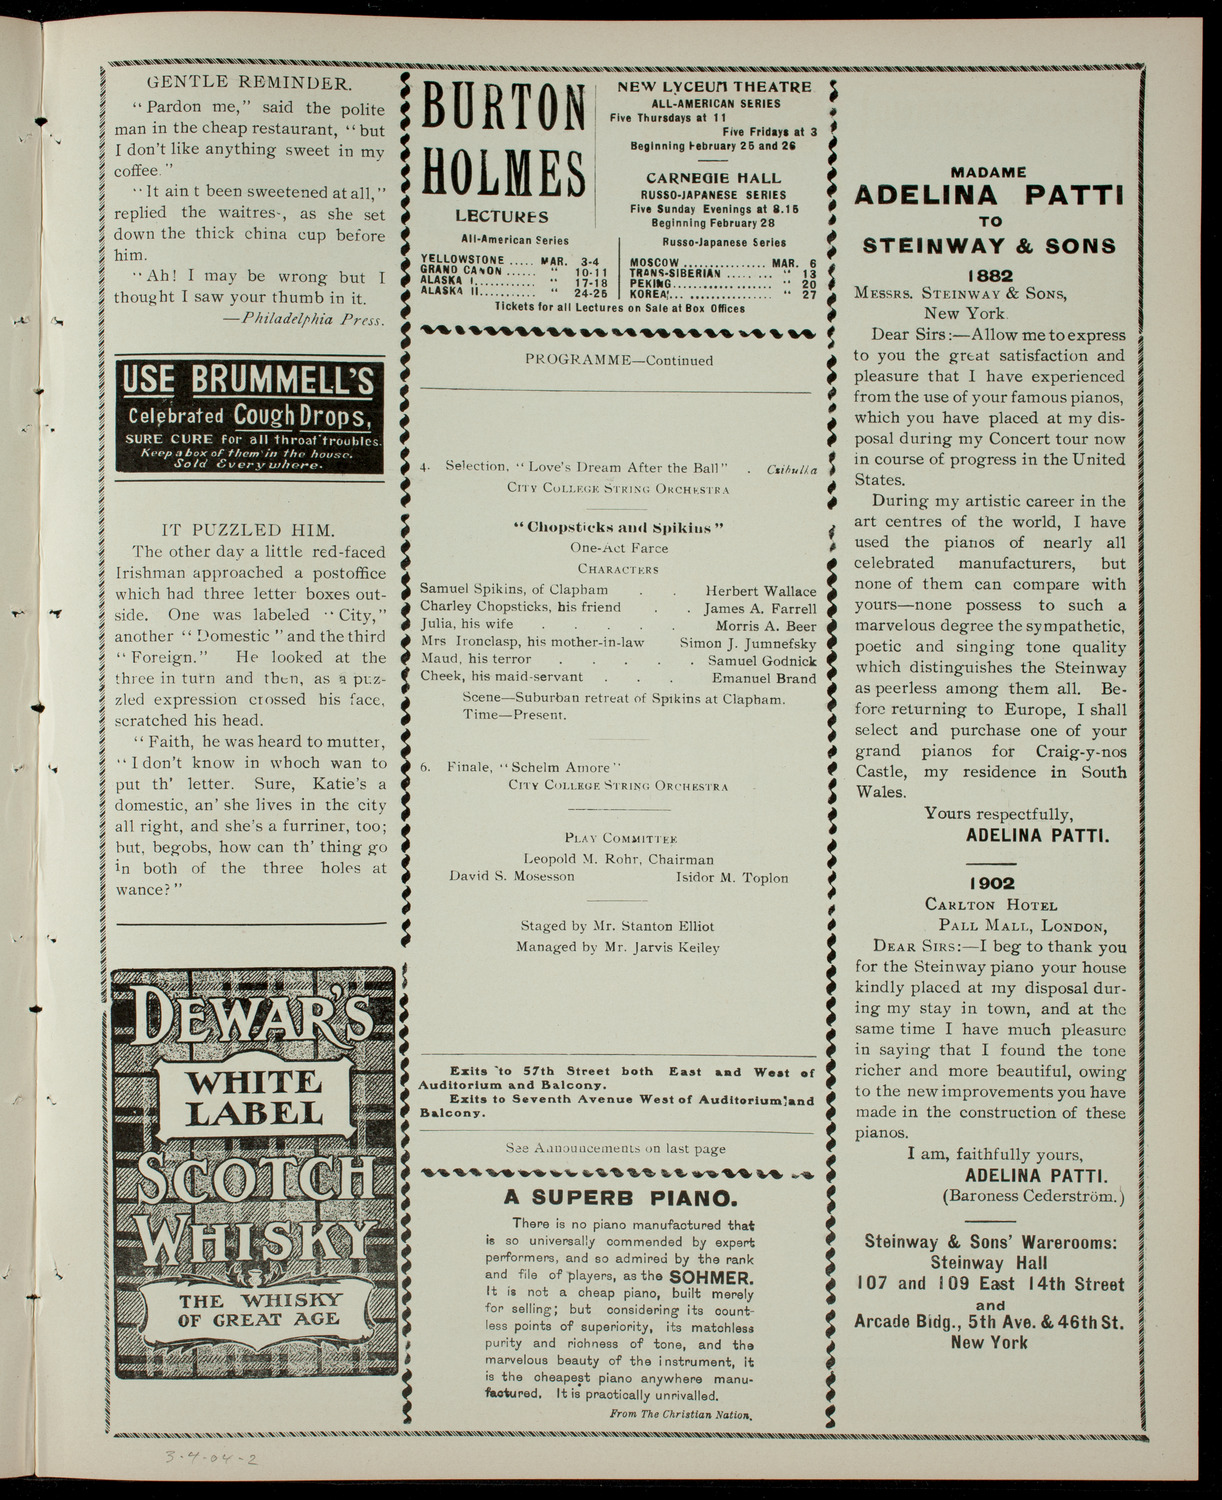 College of the City of New York Sophomore Class Play, March 4, 1904, program page 3